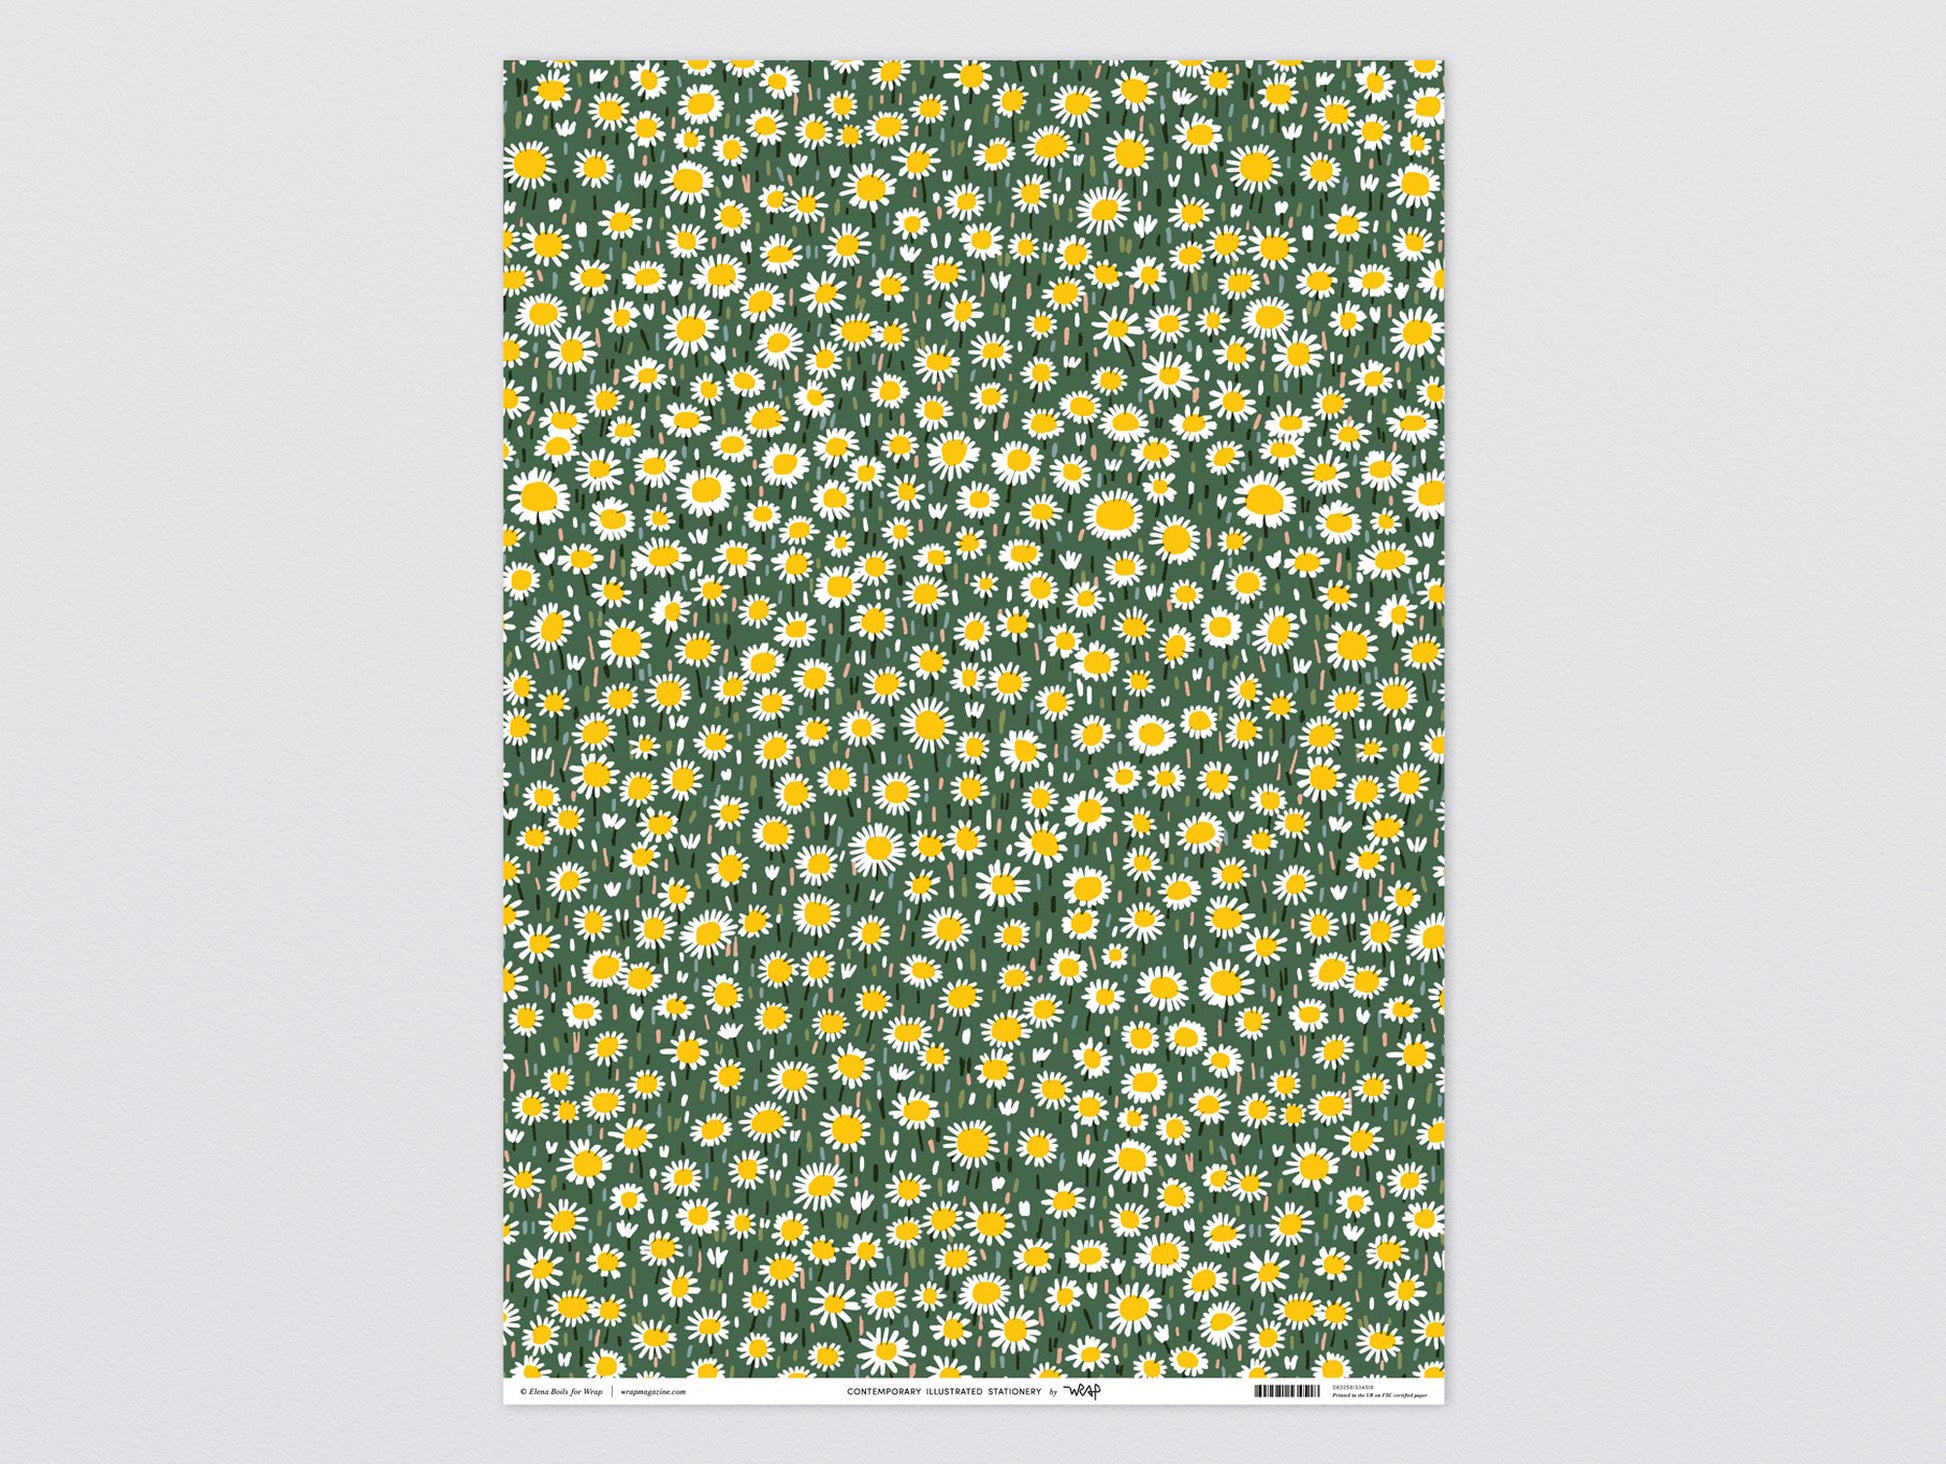 'Daisies' Wrapping Paper by Wrap